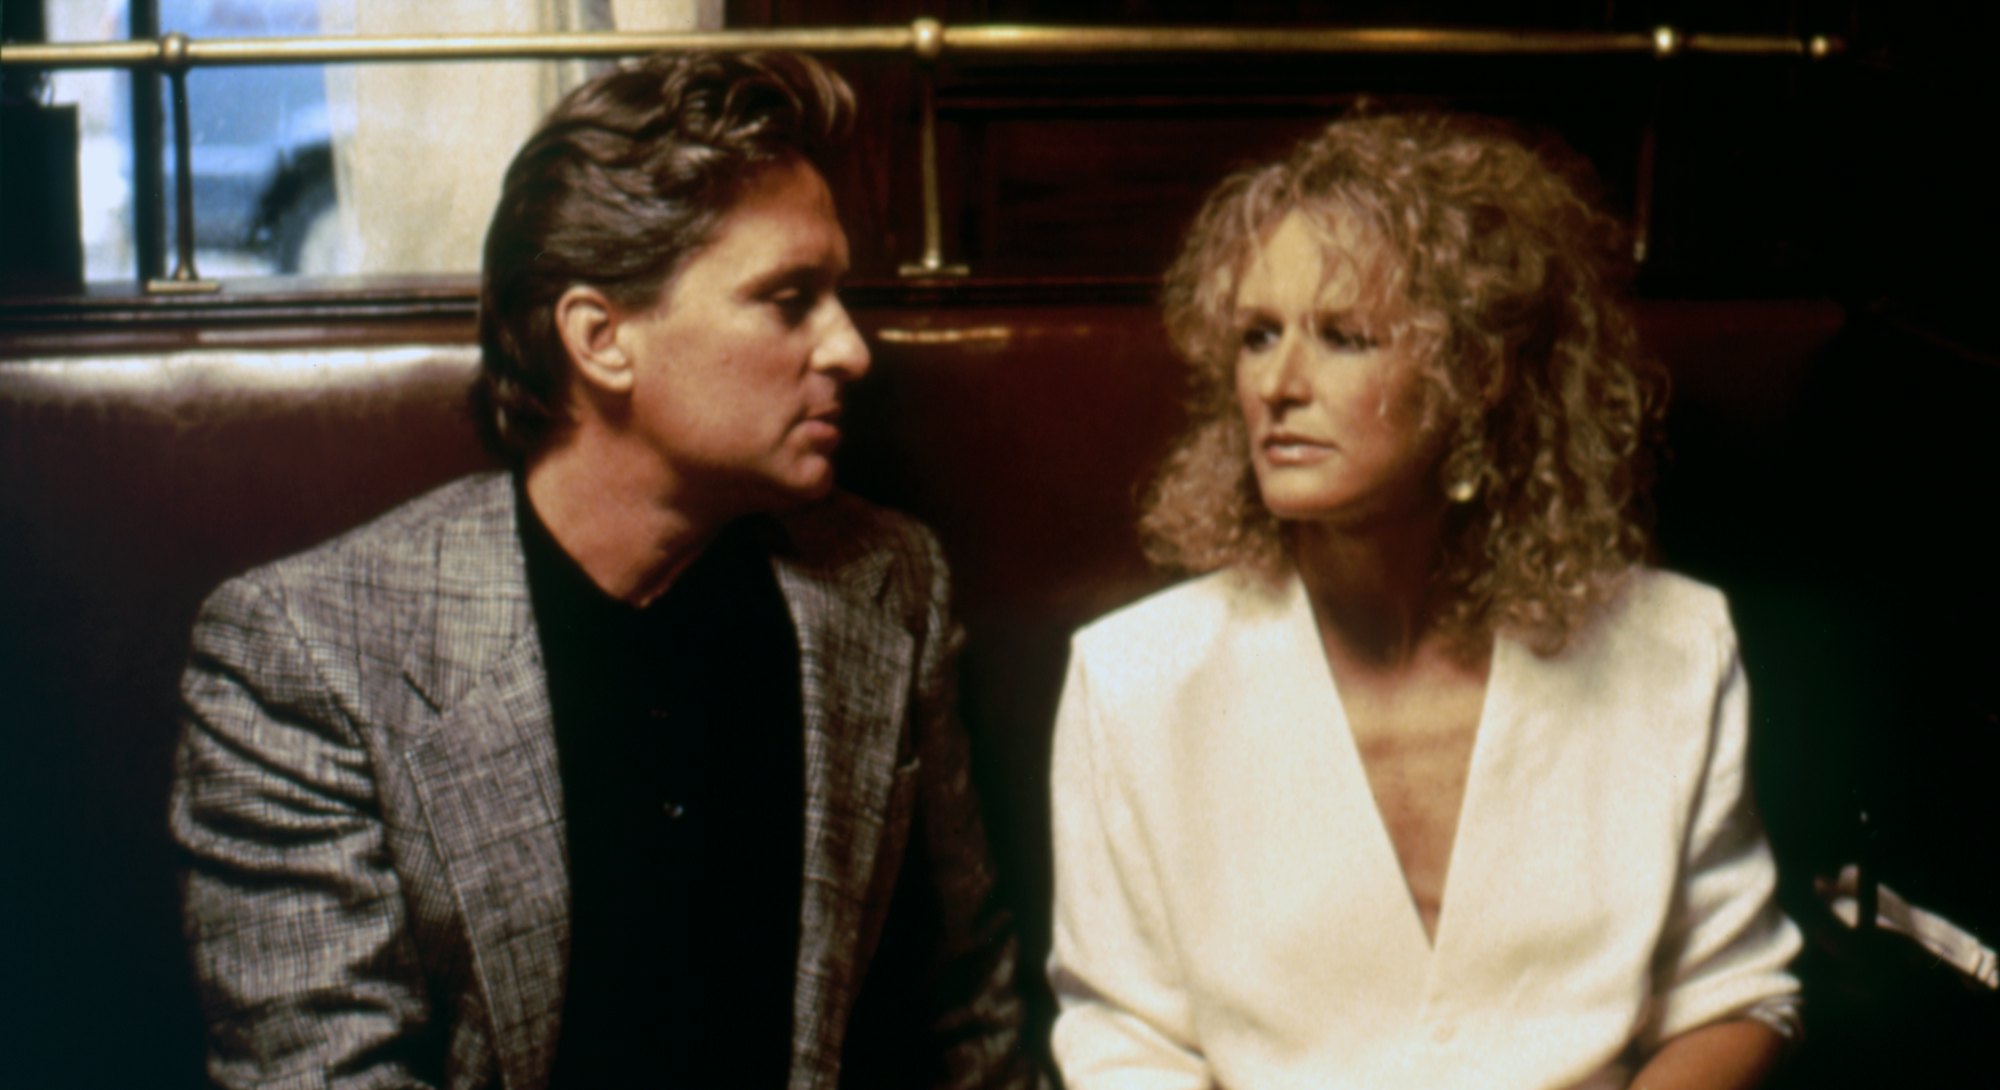 Michael Douglas and Glenn Close in 'Fatal Attraction.' Photo via Getty Images